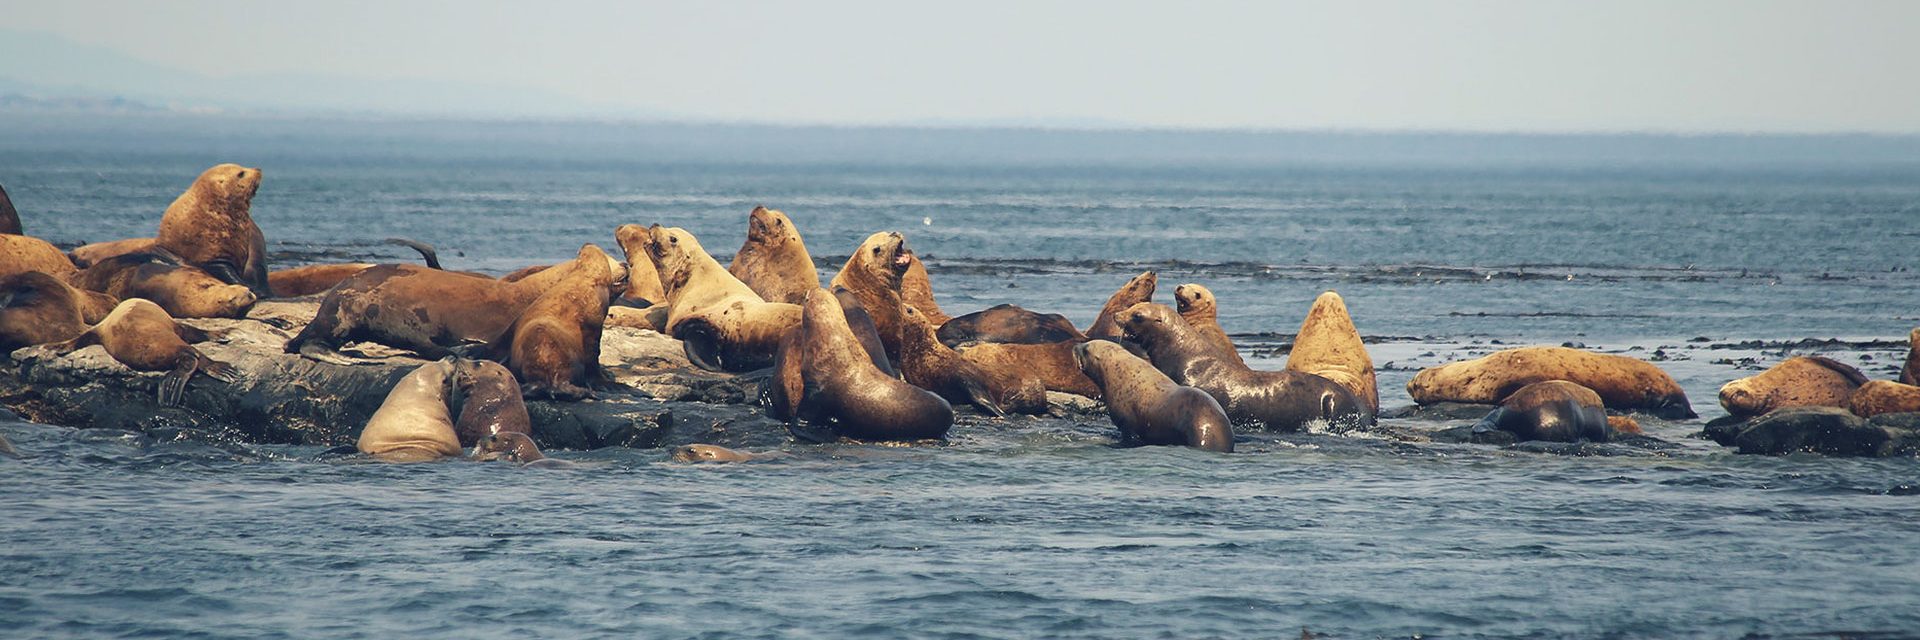 Seals/sea lions in the wild